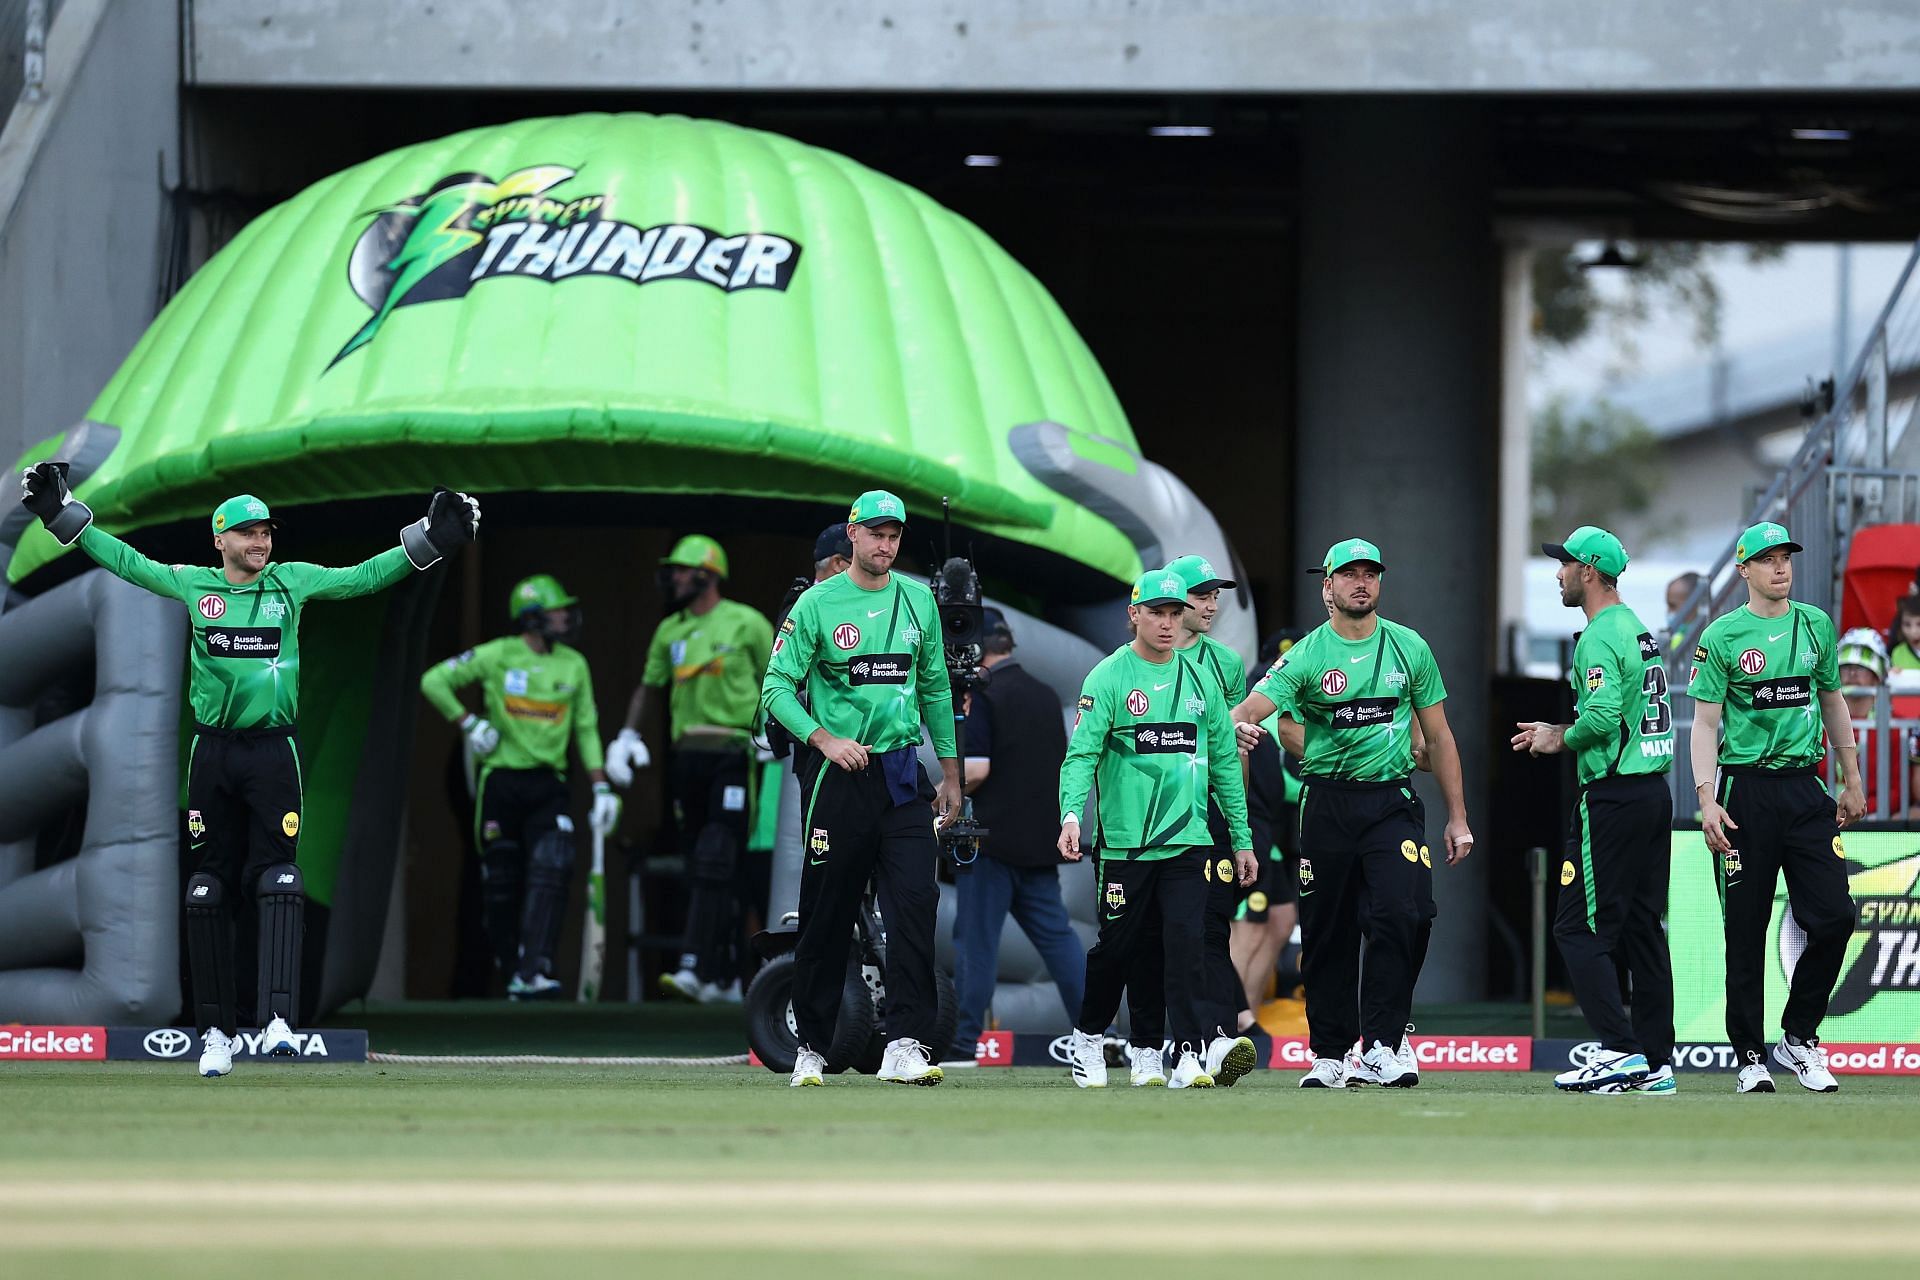 Sydney Thunder and Melbourne Stars are under a huge crisis